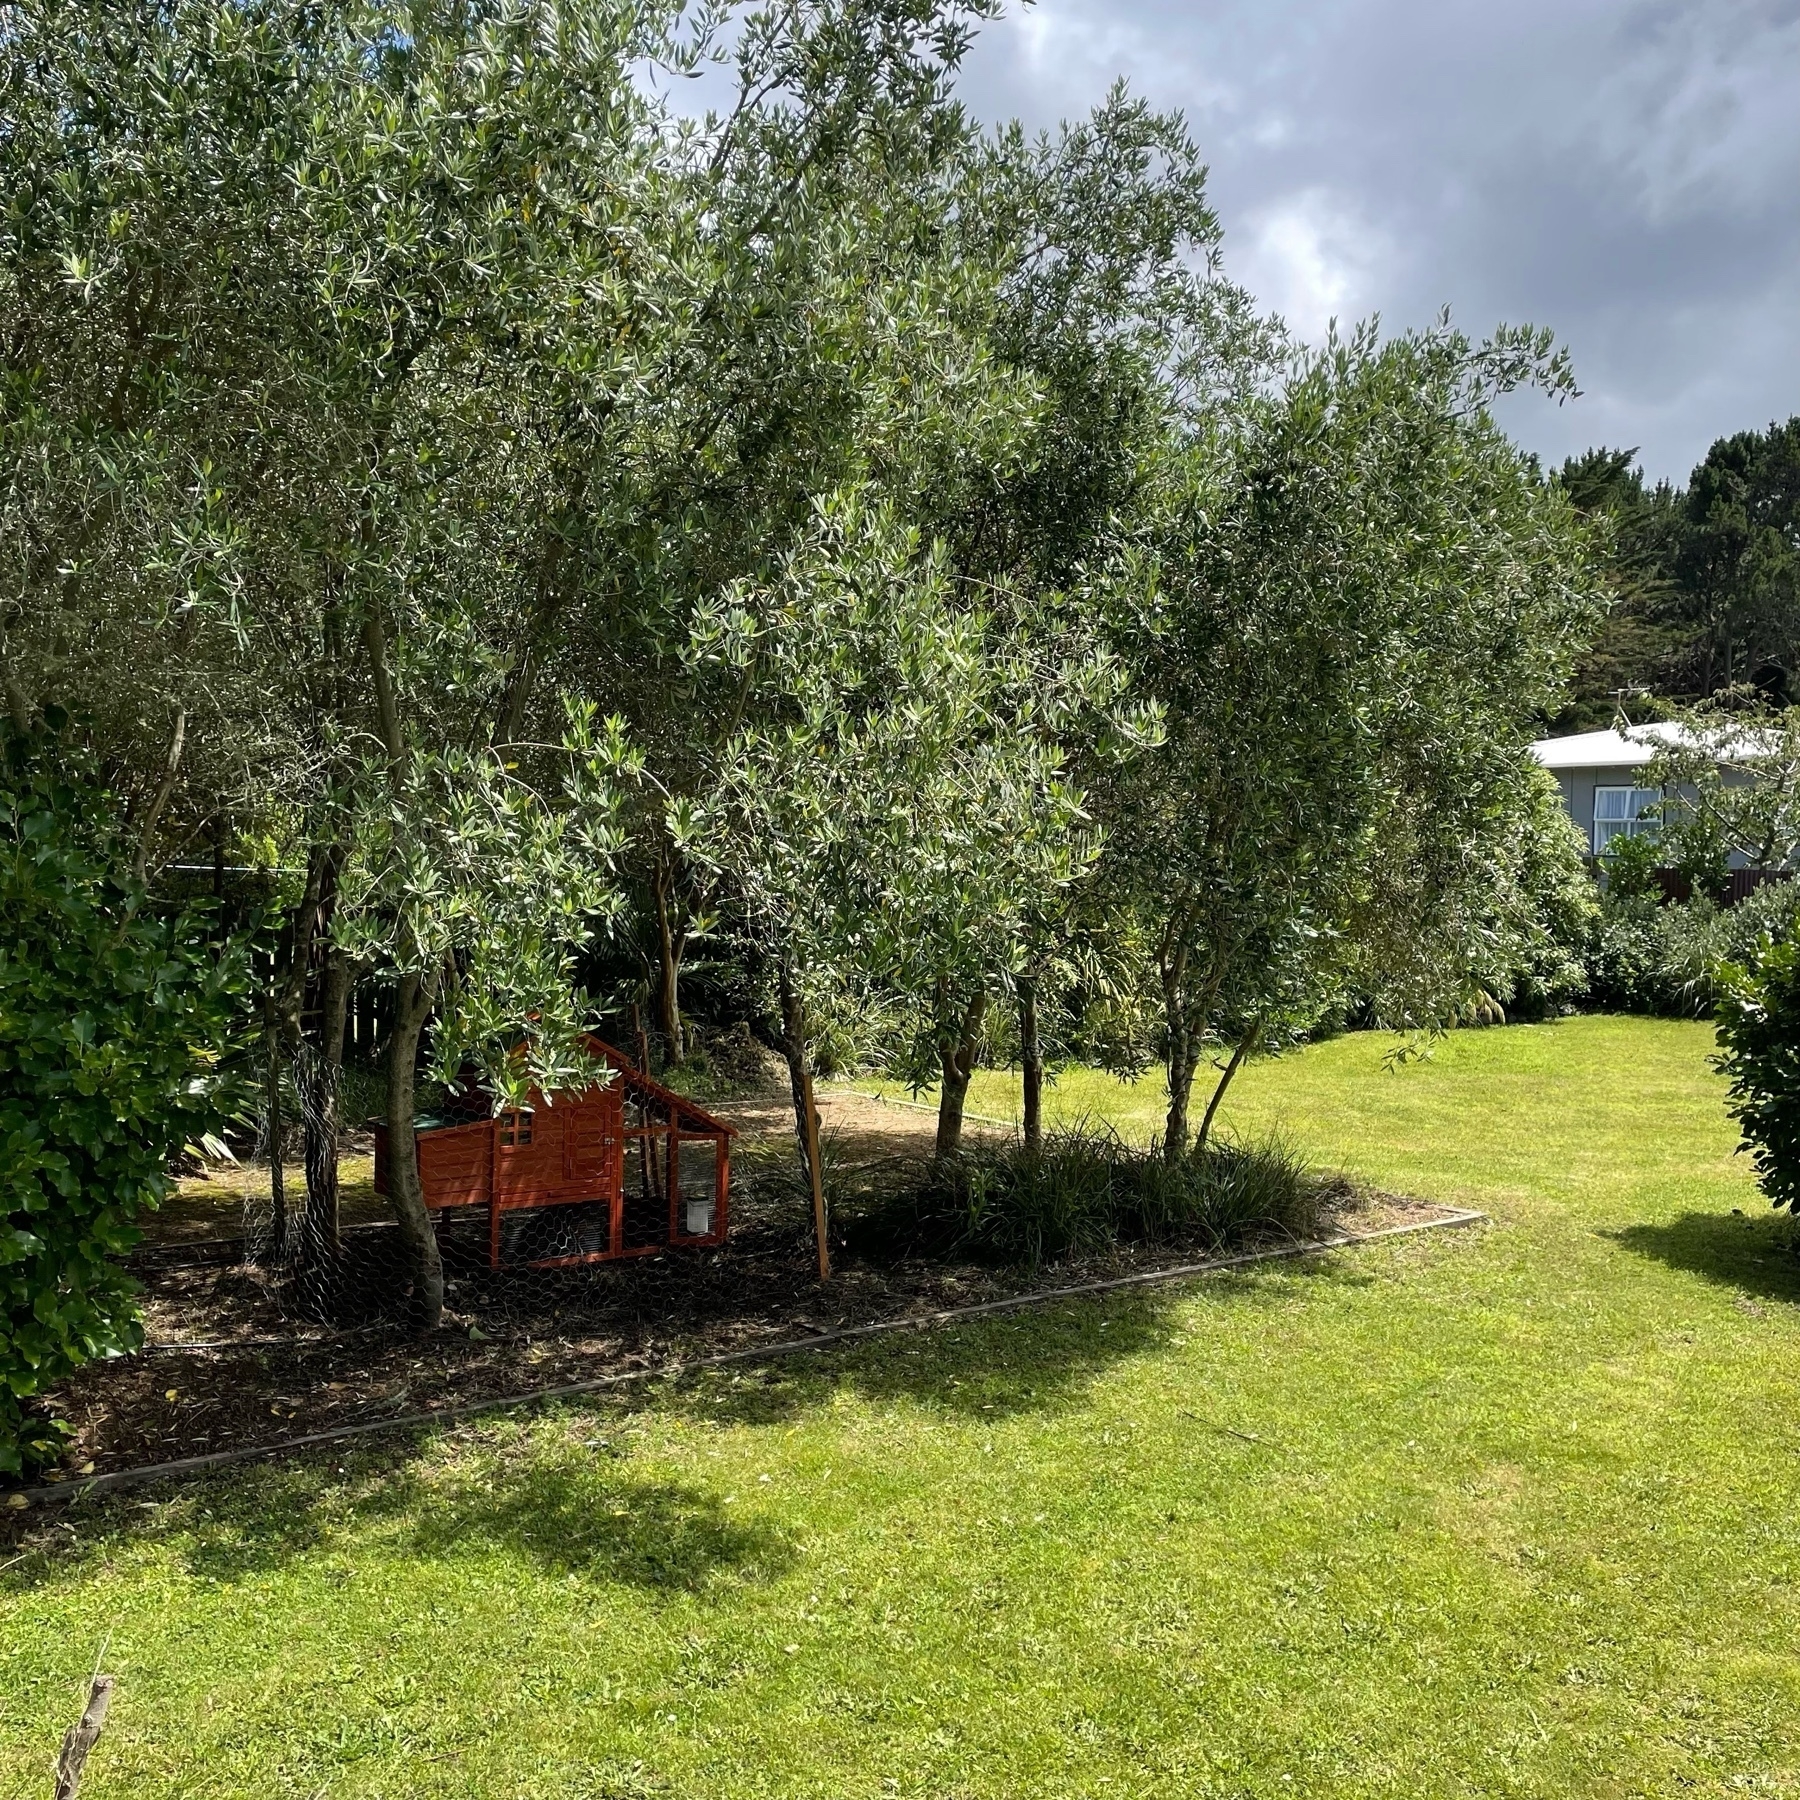 Olive trees in a garden with a chicken coop beneath.